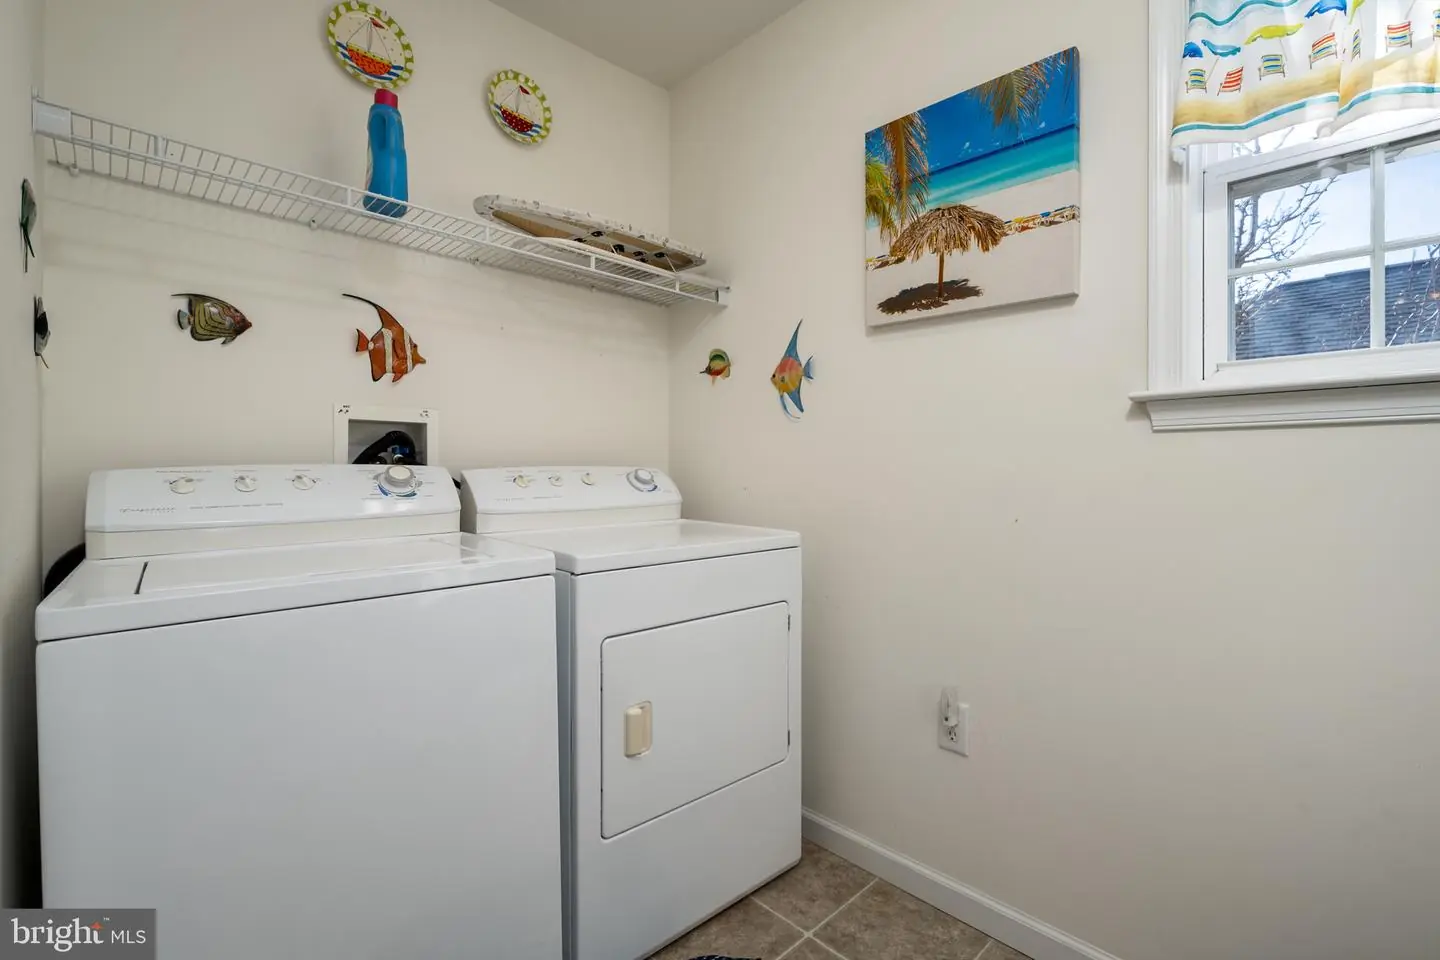 MDWO2018142-802789309354-2023-12-31-08-19-42 803 N Baltimore Ave #a | Ocean City, MD Real Estate For Sale | MLS# Mdwo2018142  - 1st Choice Properties